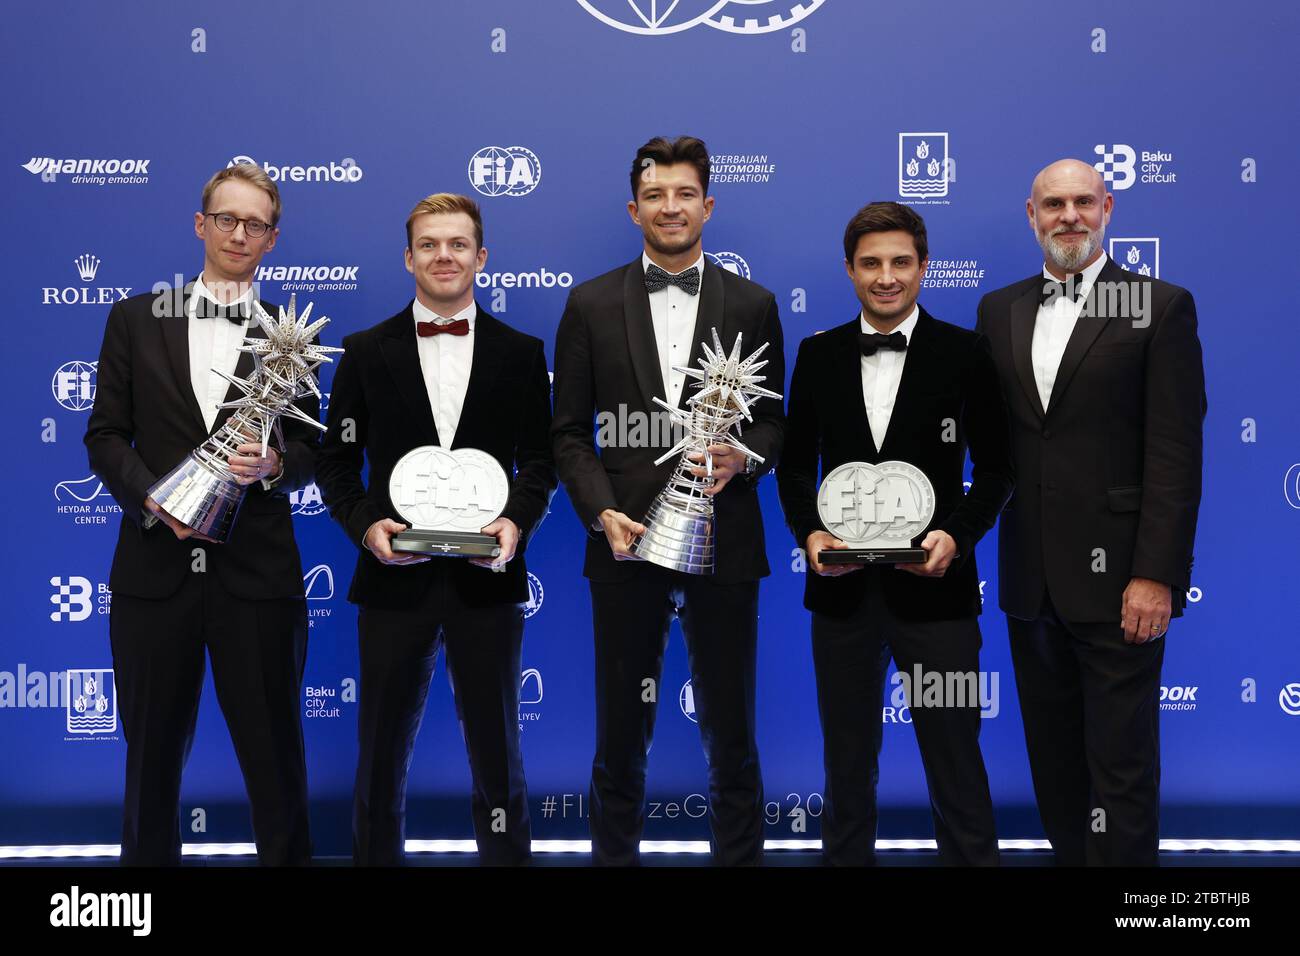 FILIPPI Sylvain, ABB FIA Formula E World Championship - Manufacturer Champion, portrait CASSIDY Nick, ABB FIA Formula E World Championship - 2nd Place, portrait EVANS Mitch, ABB FIA Formula E World Championship - 3rd Place, portrait DENNIS Jake, ABB FIA Formula E World Championship - Champion, portrait JEF DODDS during the 2023 FIA Prize Giving Ceremony in Baky on December 8, 2023 at Baku Convention Center in Baku, Azerbaijan Credit: Independent Photo Agency/Alamy Live News Stock Photo